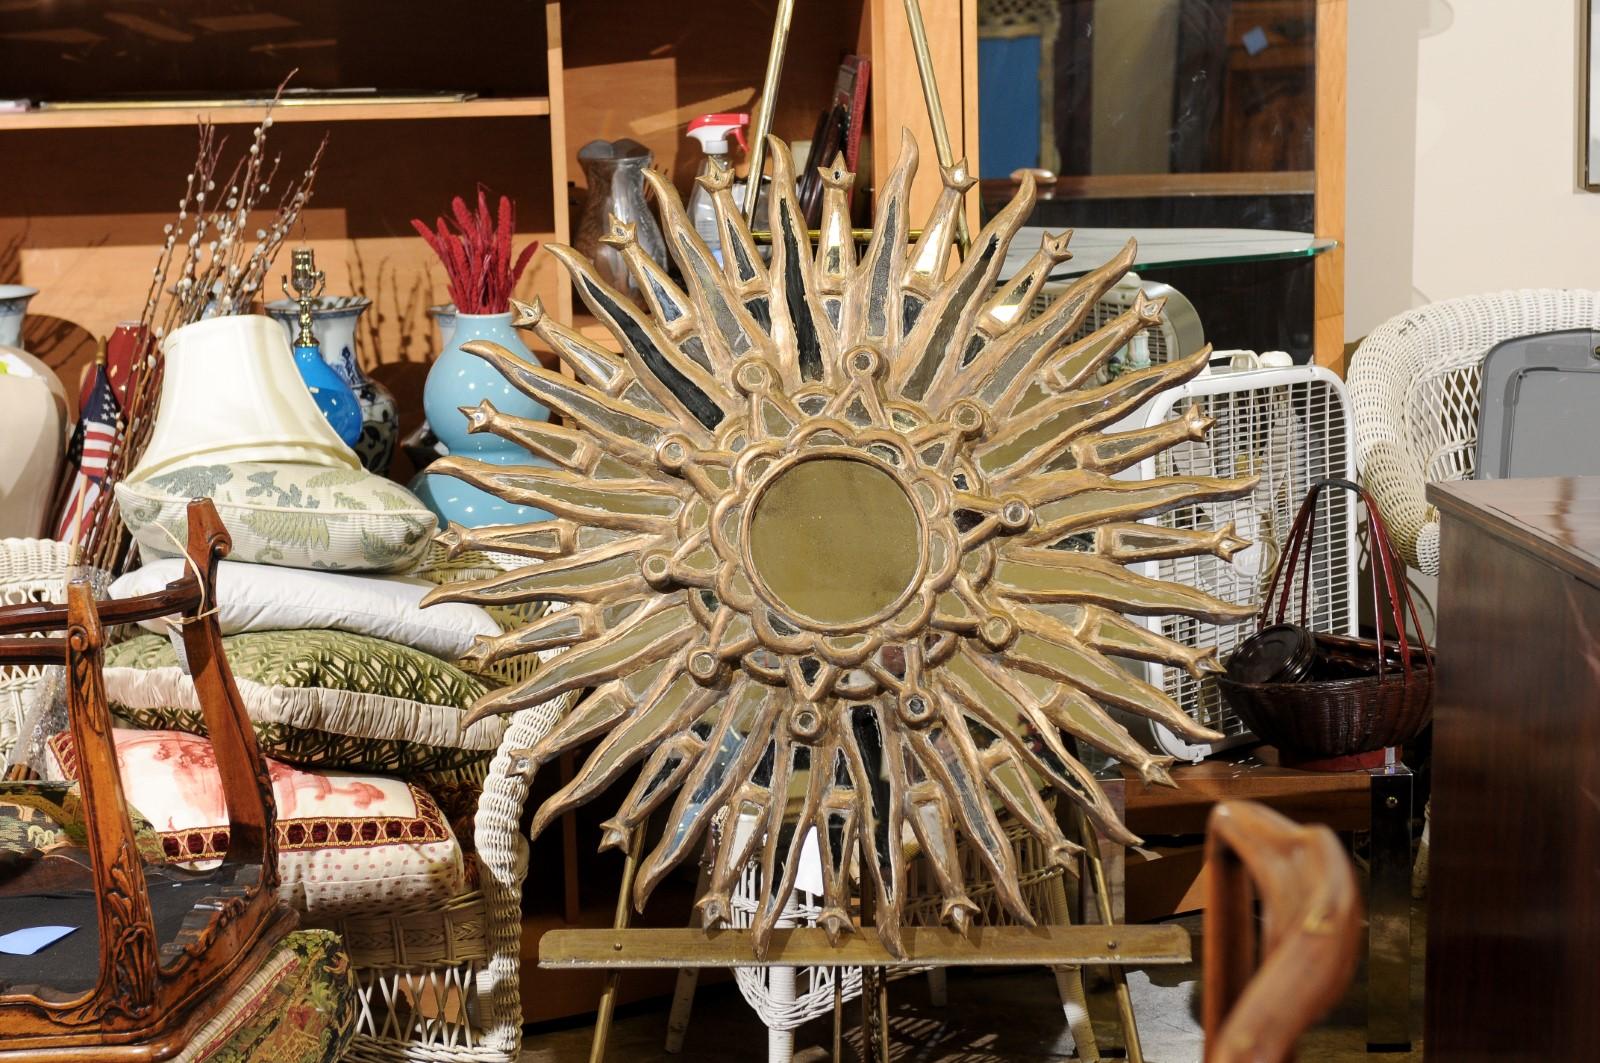 A beautiful sunburst mirror featuring a 7 inch diameter mirror in the center surrounded by mirror inserts in the frame. It could stand alone or be nice to use with an assortment of mirrors.